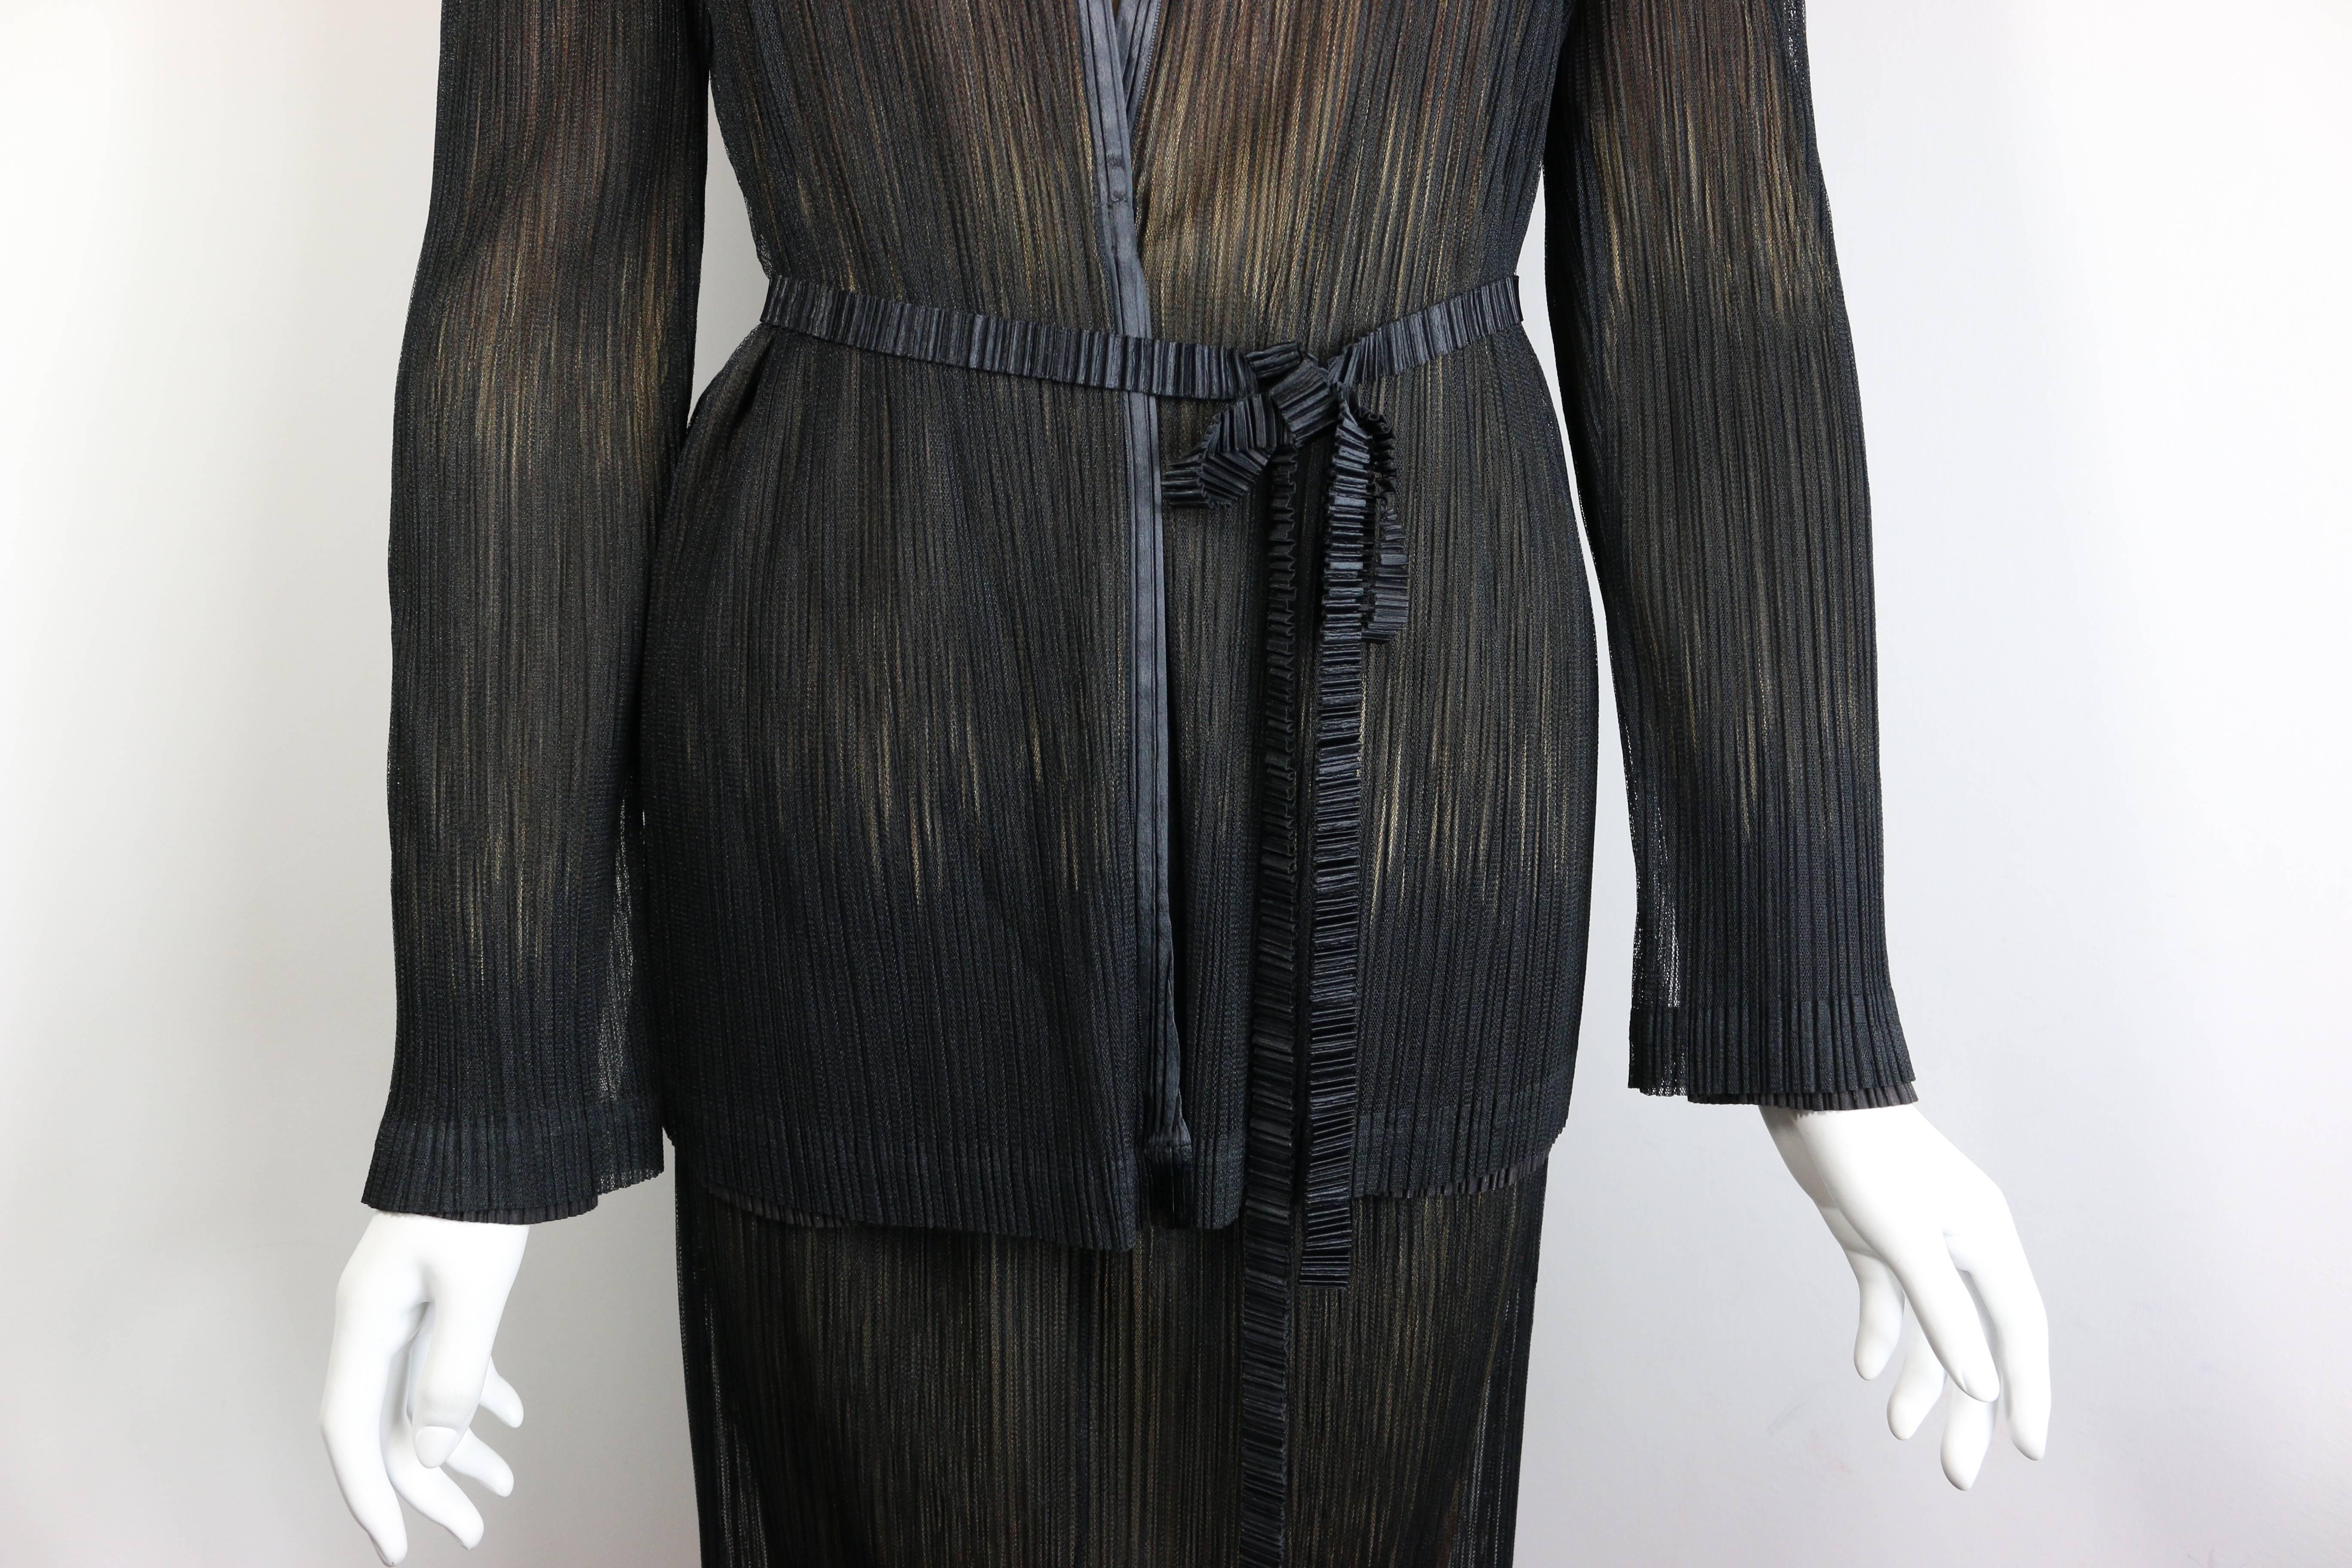 - Vintage 90s Issey Miyake double layers black mesh on top and beige/brownish/gold/black second pleated layer jacket and skirt set.
  
- Featuring a black pleated belt and a hidden button on the jacket. 

- Size M. 

- 100% Polyester 

- Jacket: